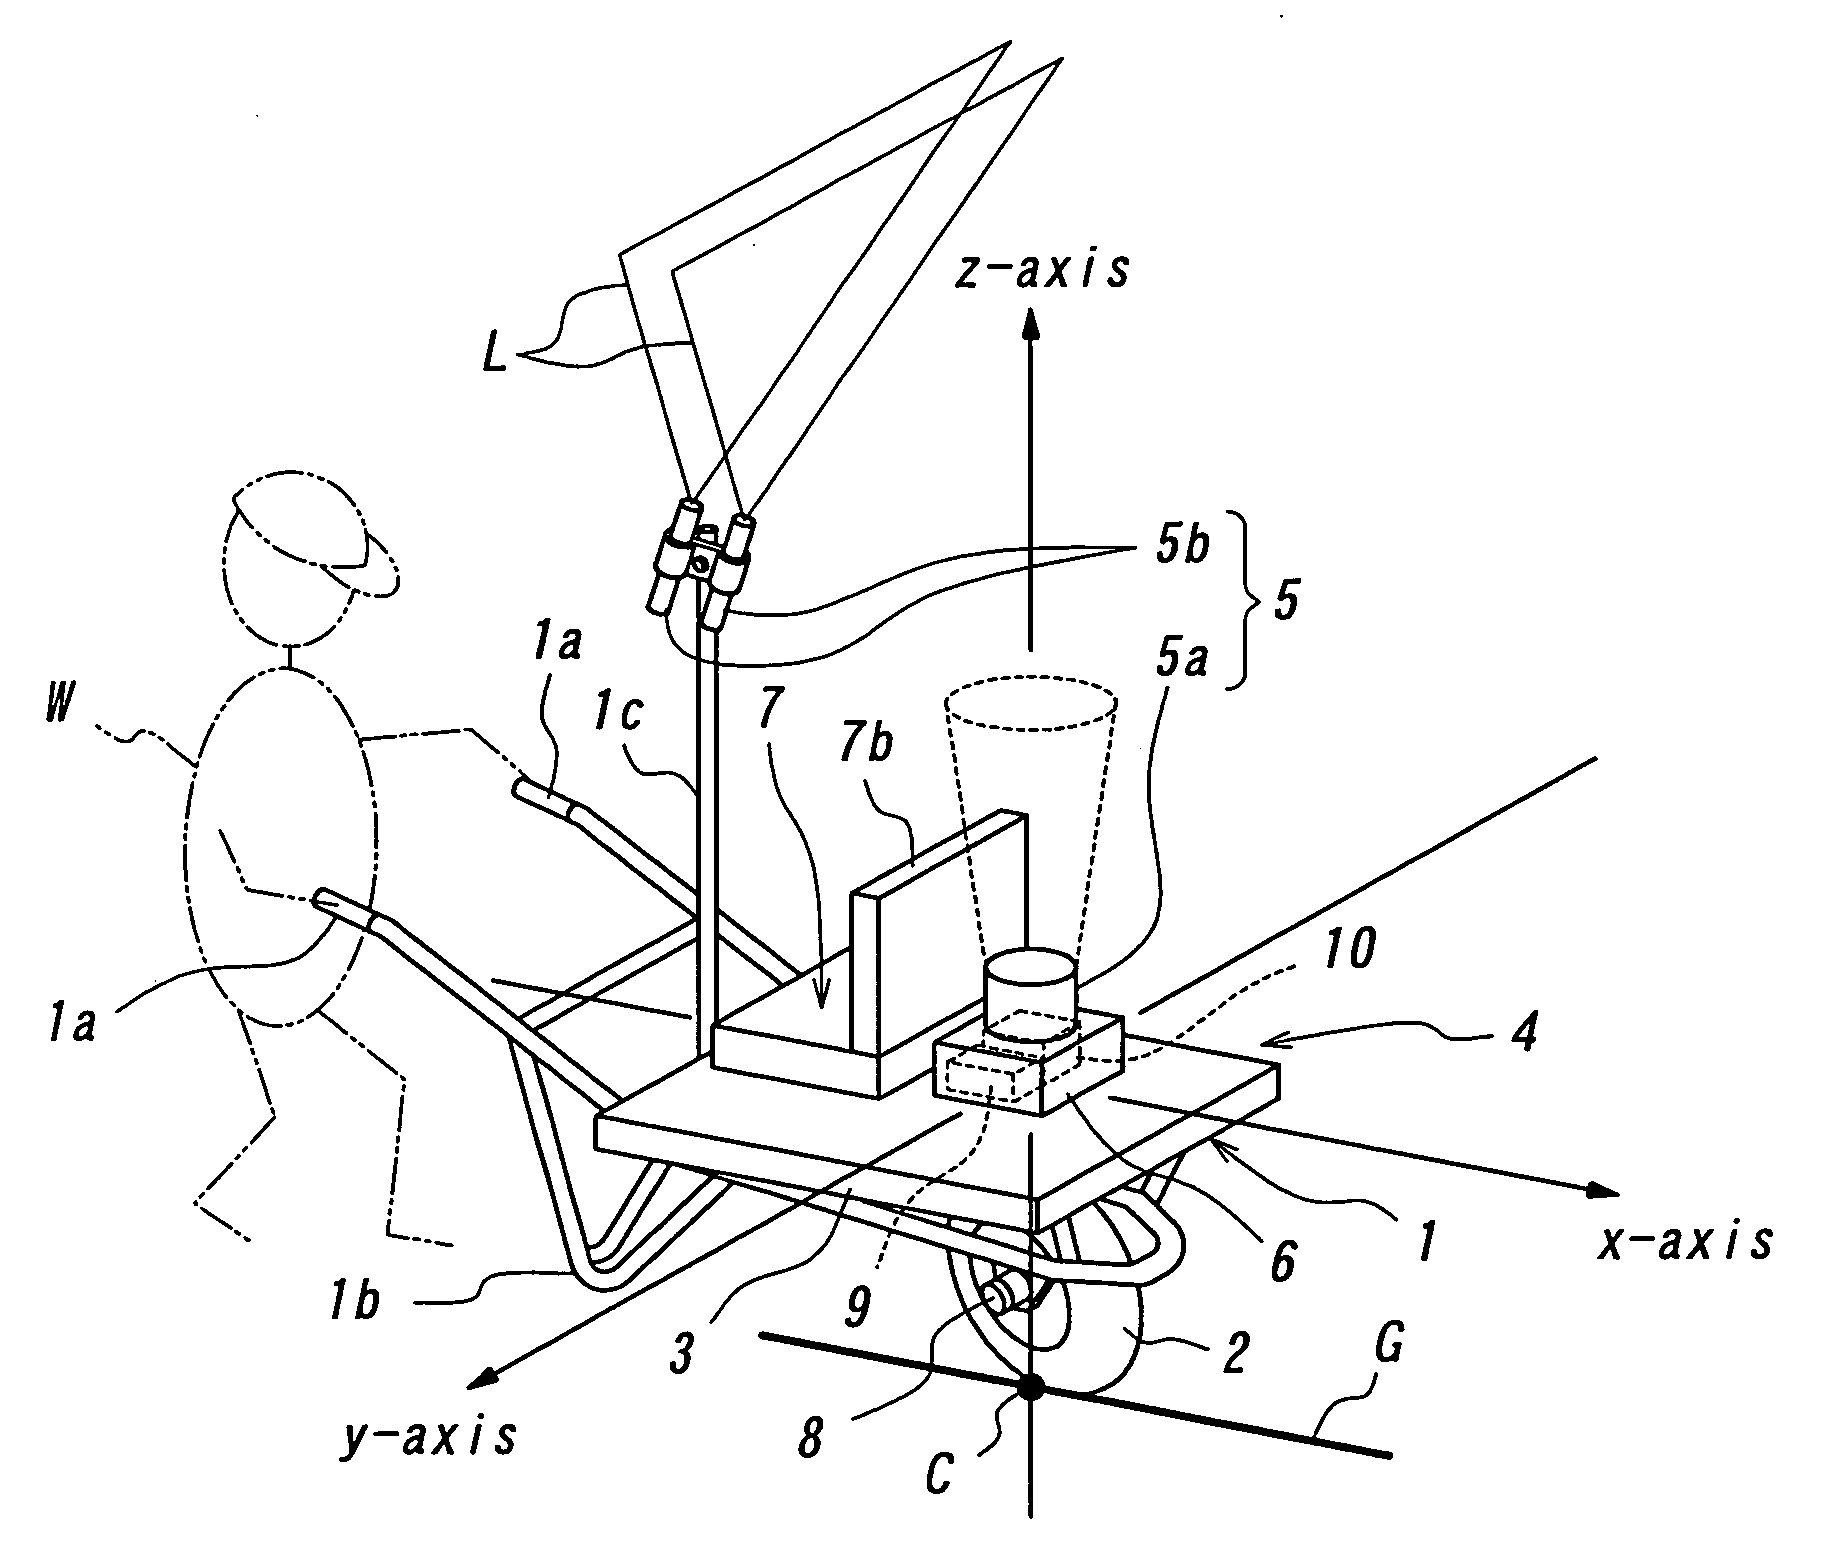 Mobile measurement system of three-dimensional structure